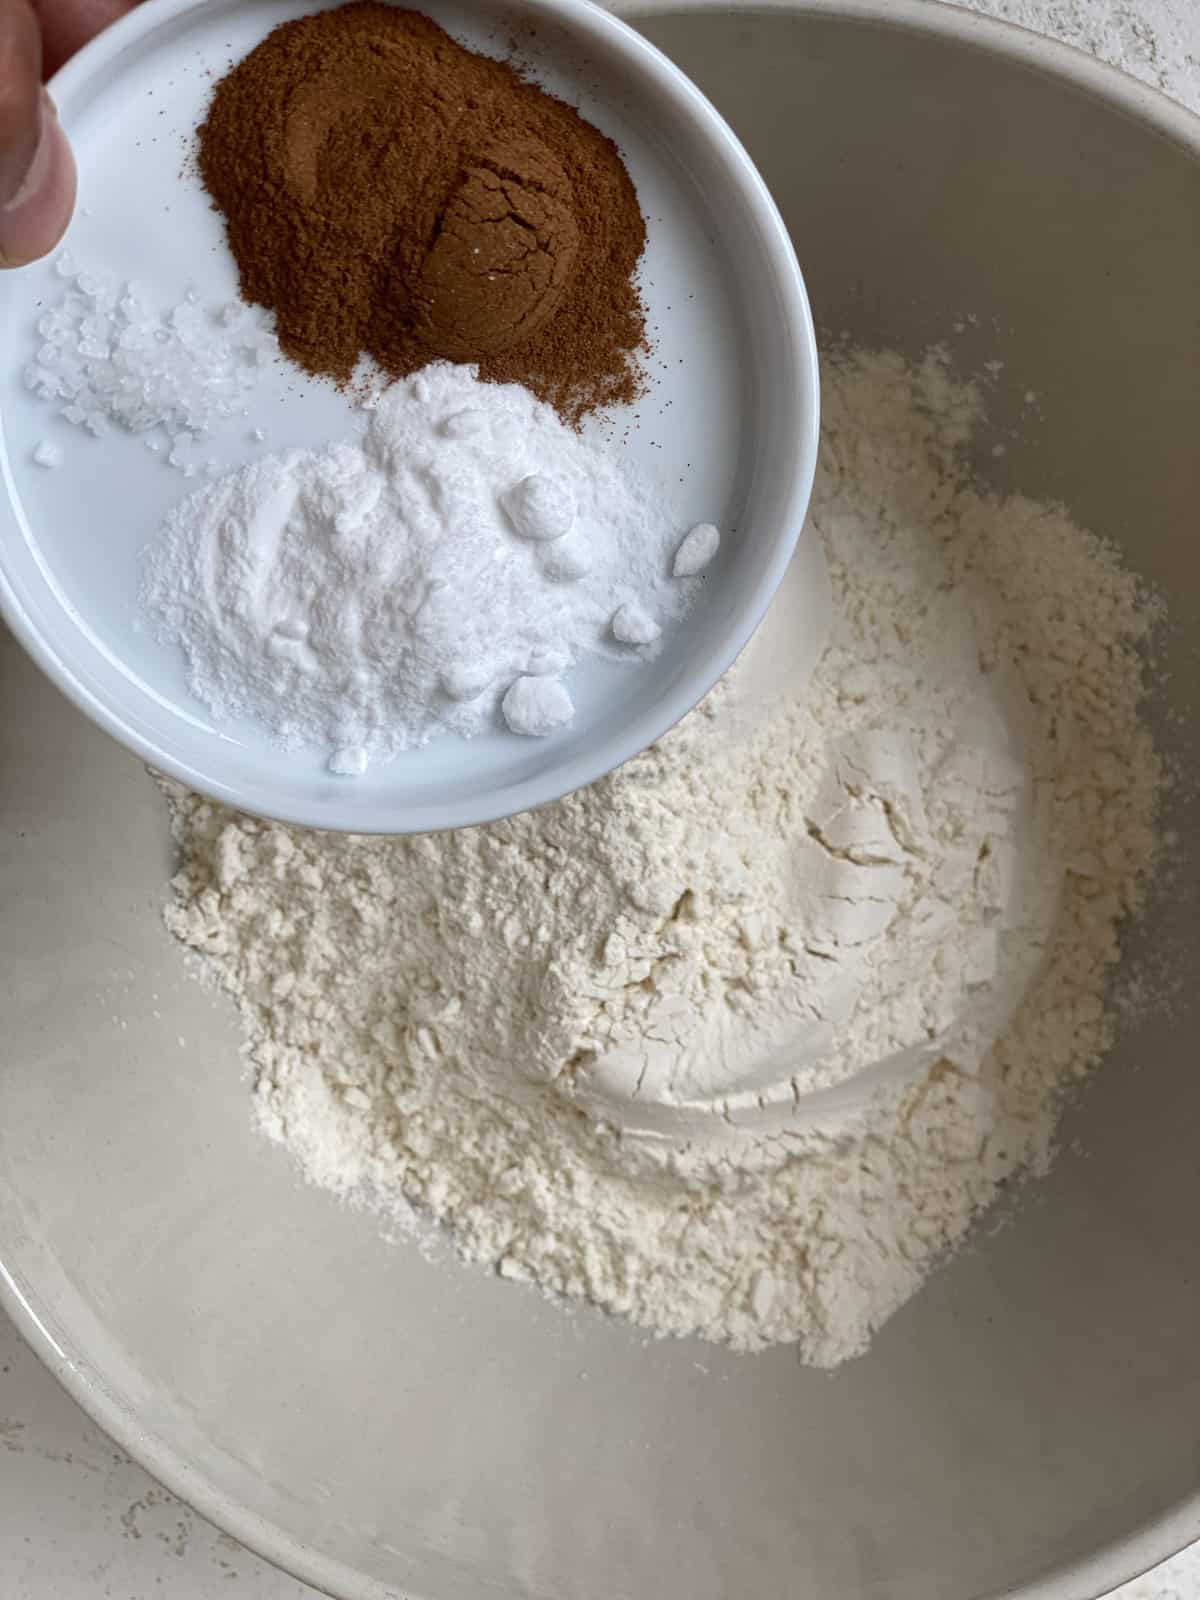 process shot of mixing dry ingredients in a bowl